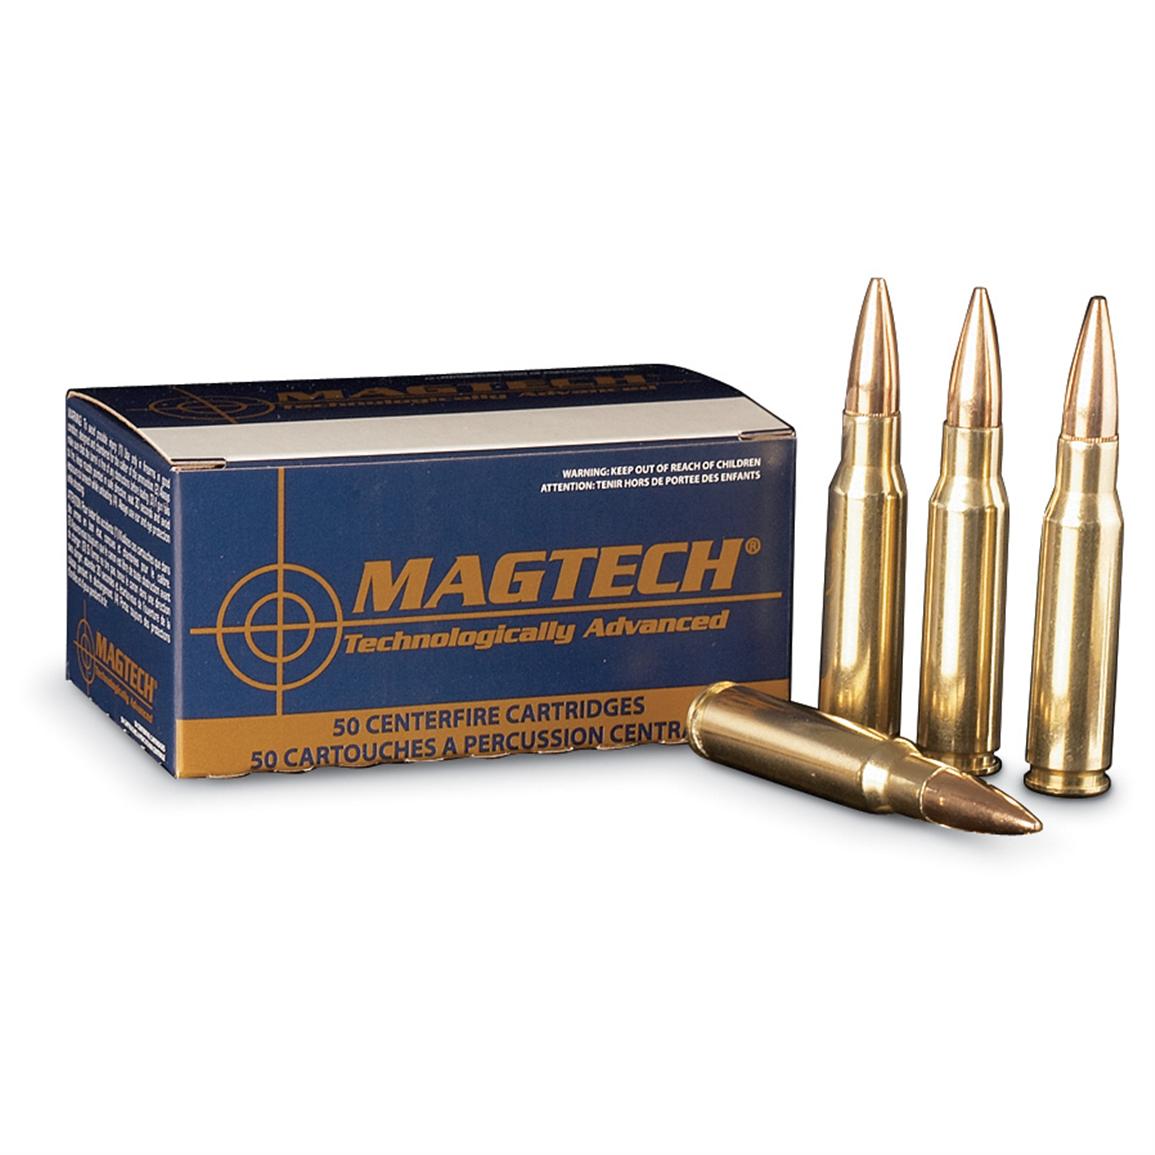 100 Rounds 308 150 Grain Fmj Ammo 124105 308 Winchester Ammo At | Free ...